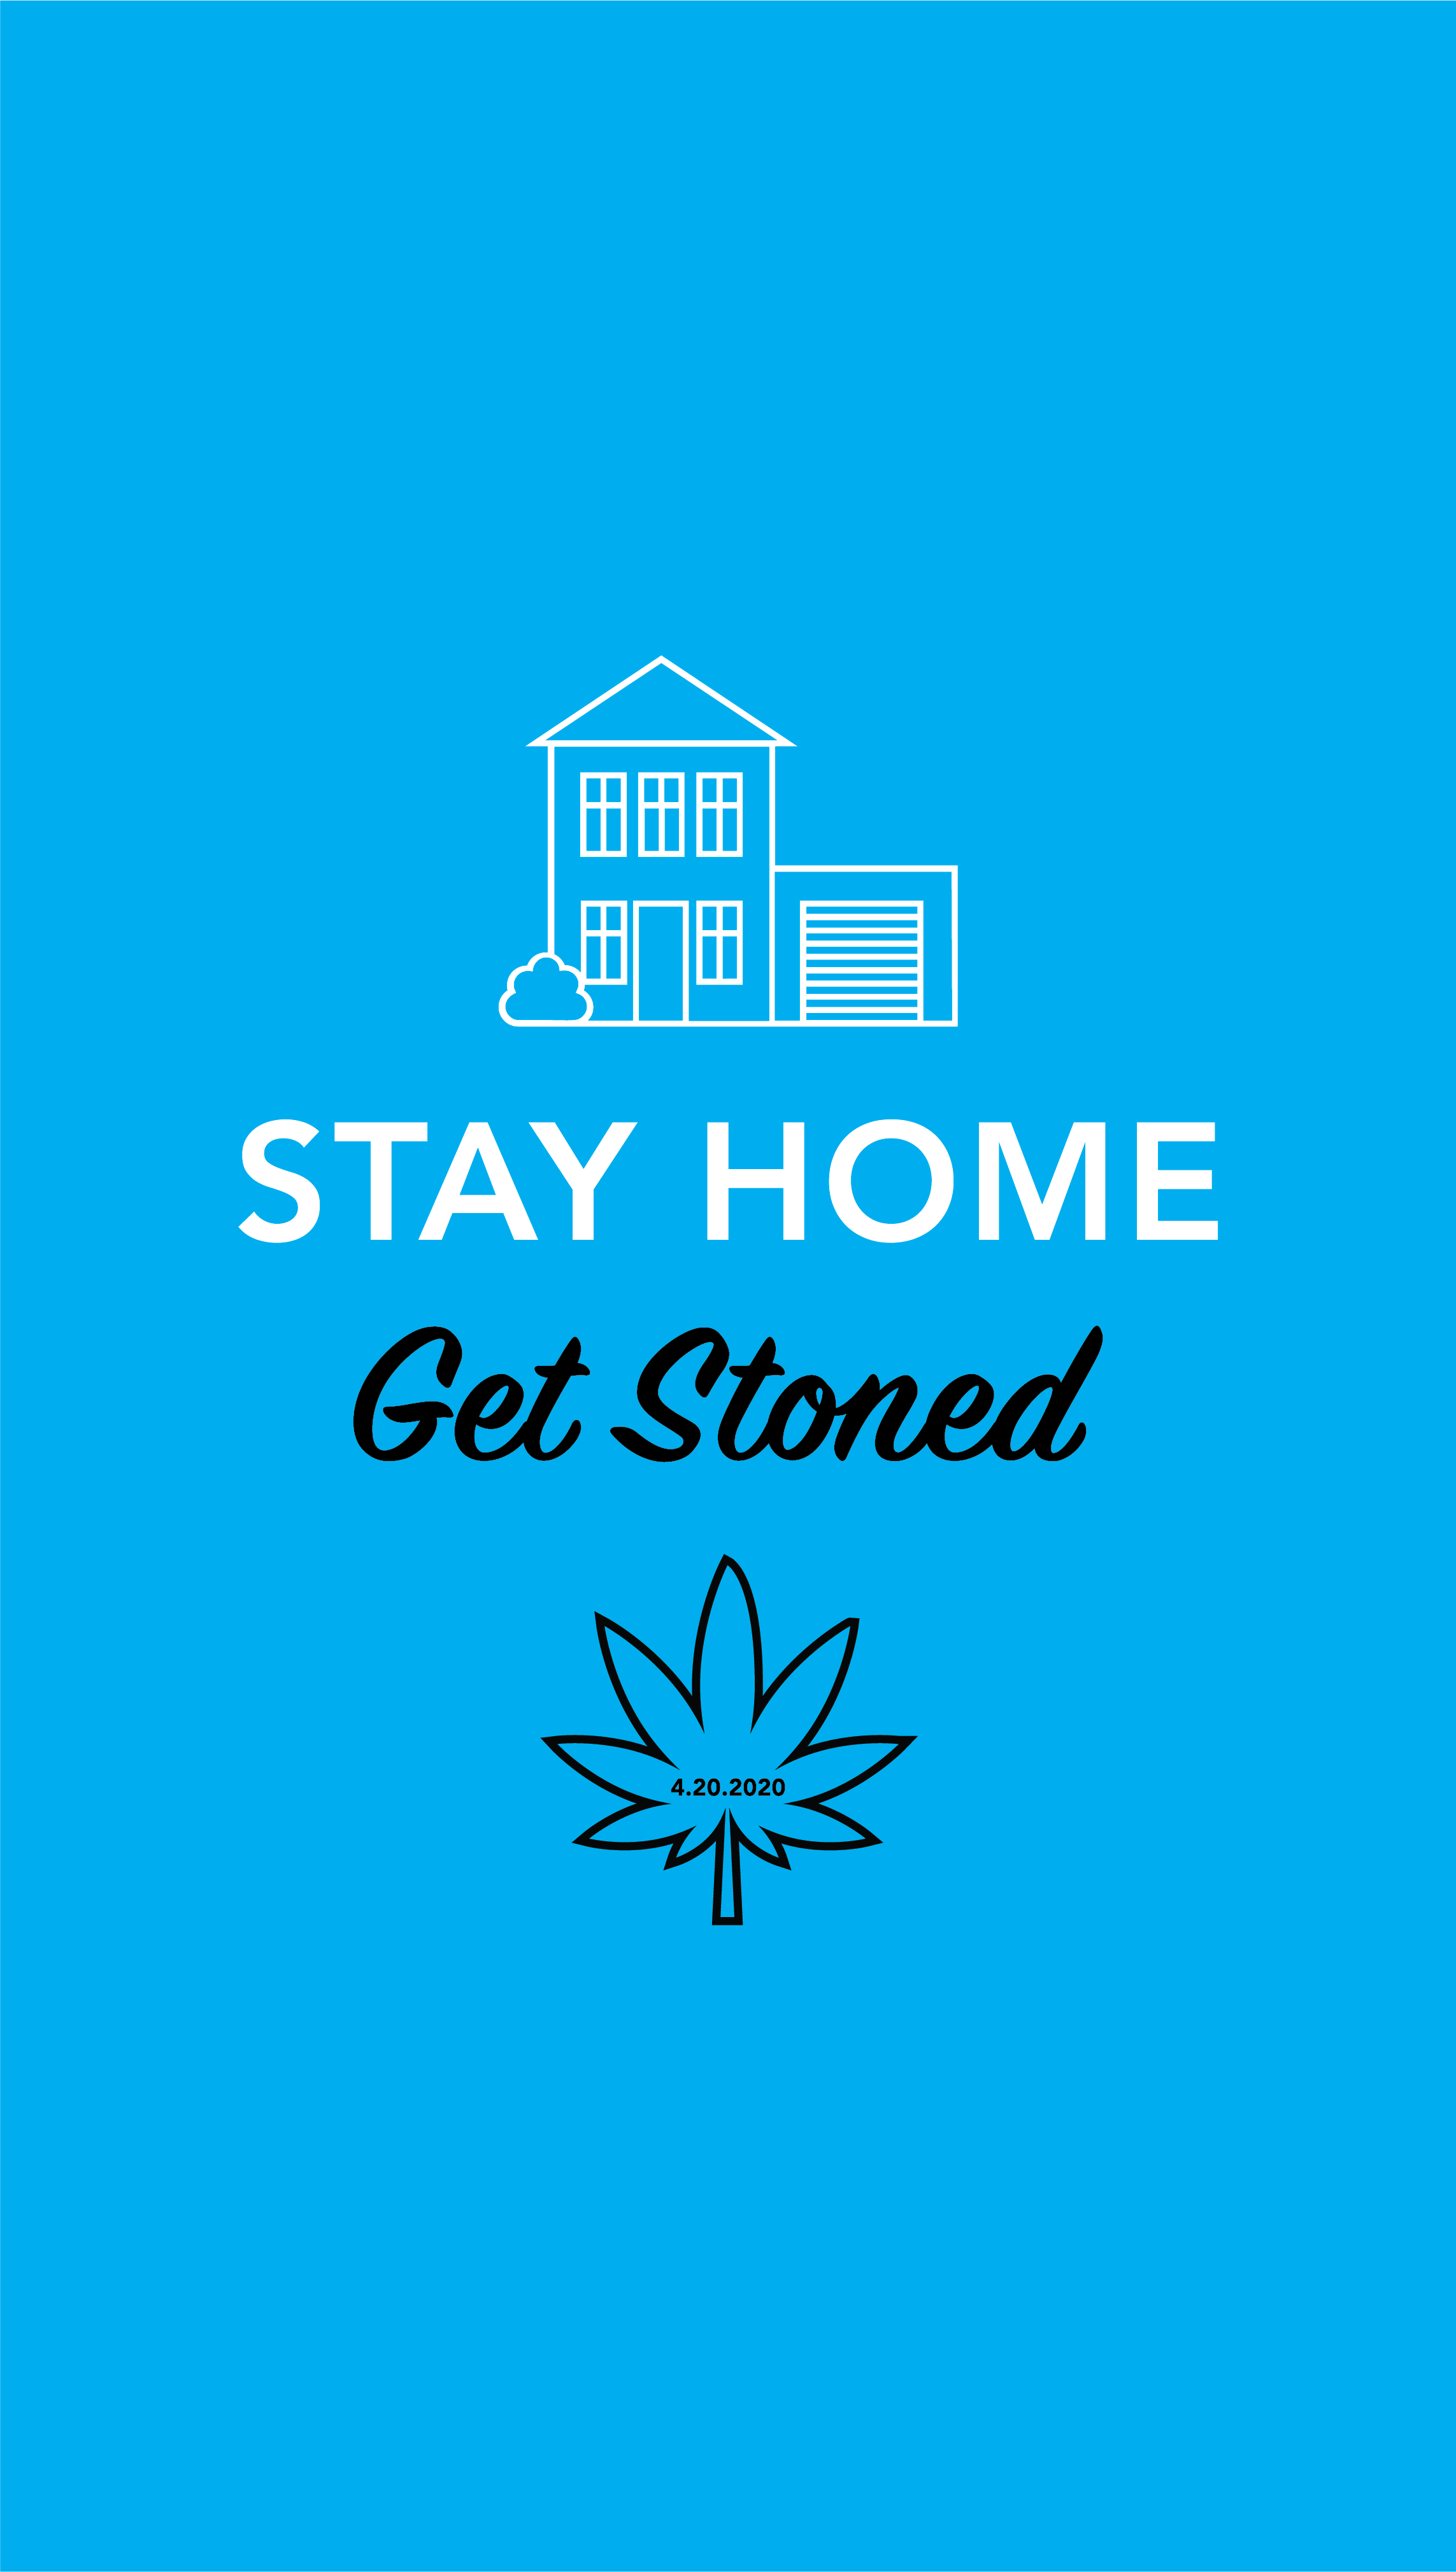 Stay home. Get Stoned.